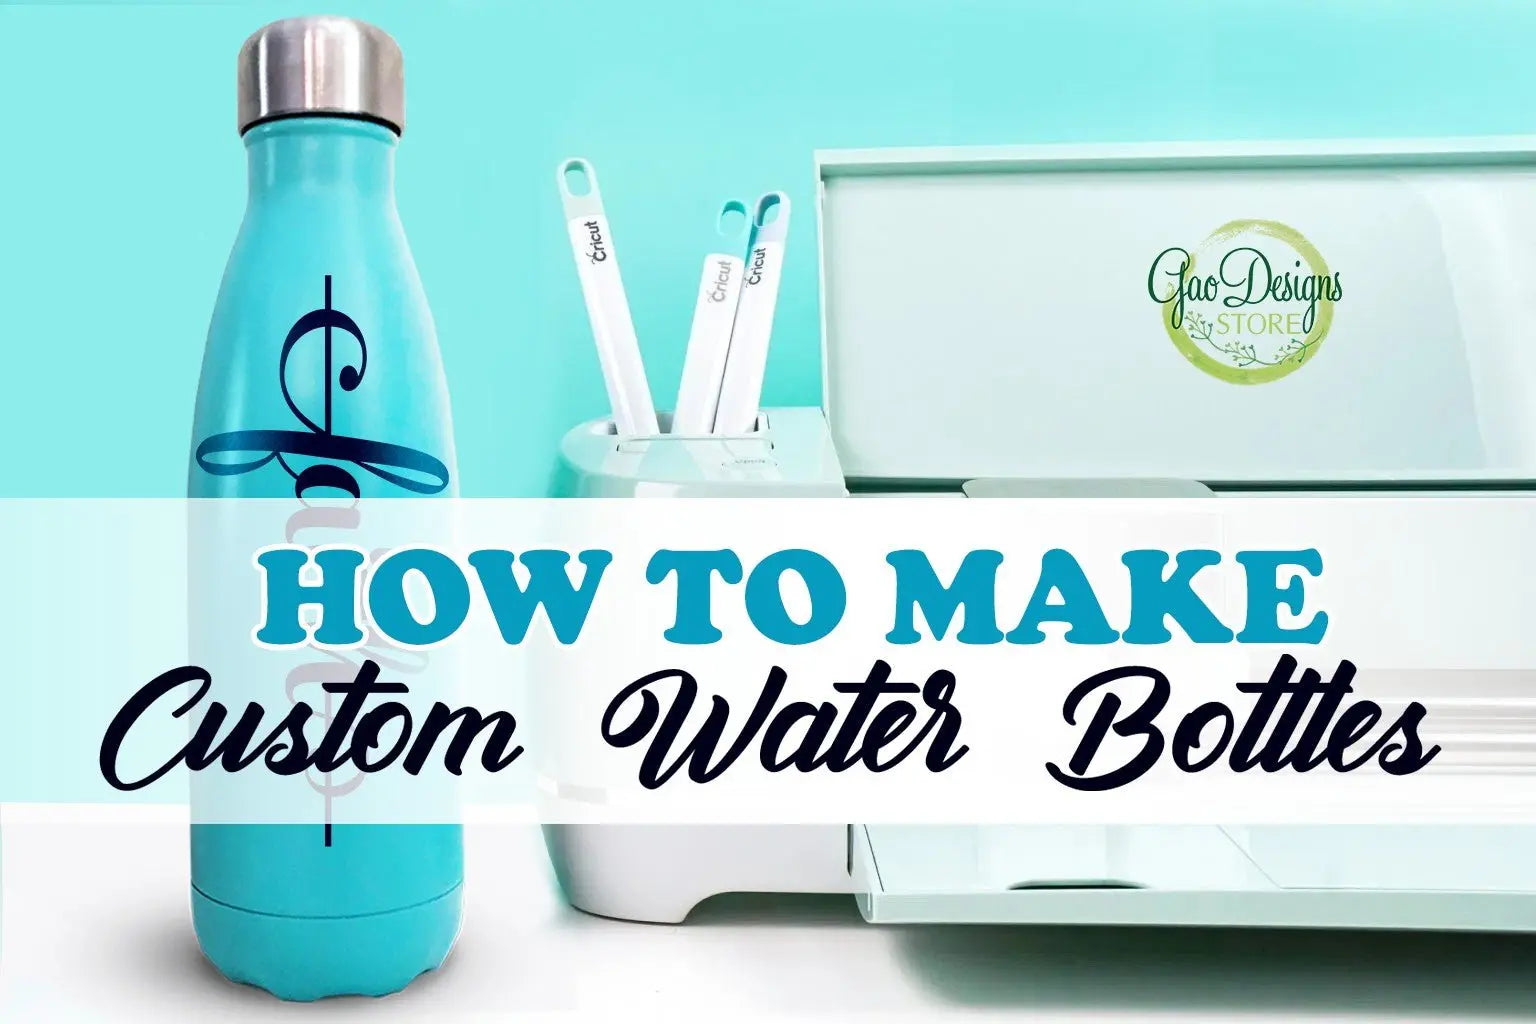 HOW TO MAKE CUSTOM WATER BOTTLES WITH CRICUT - GaoDesigns Store